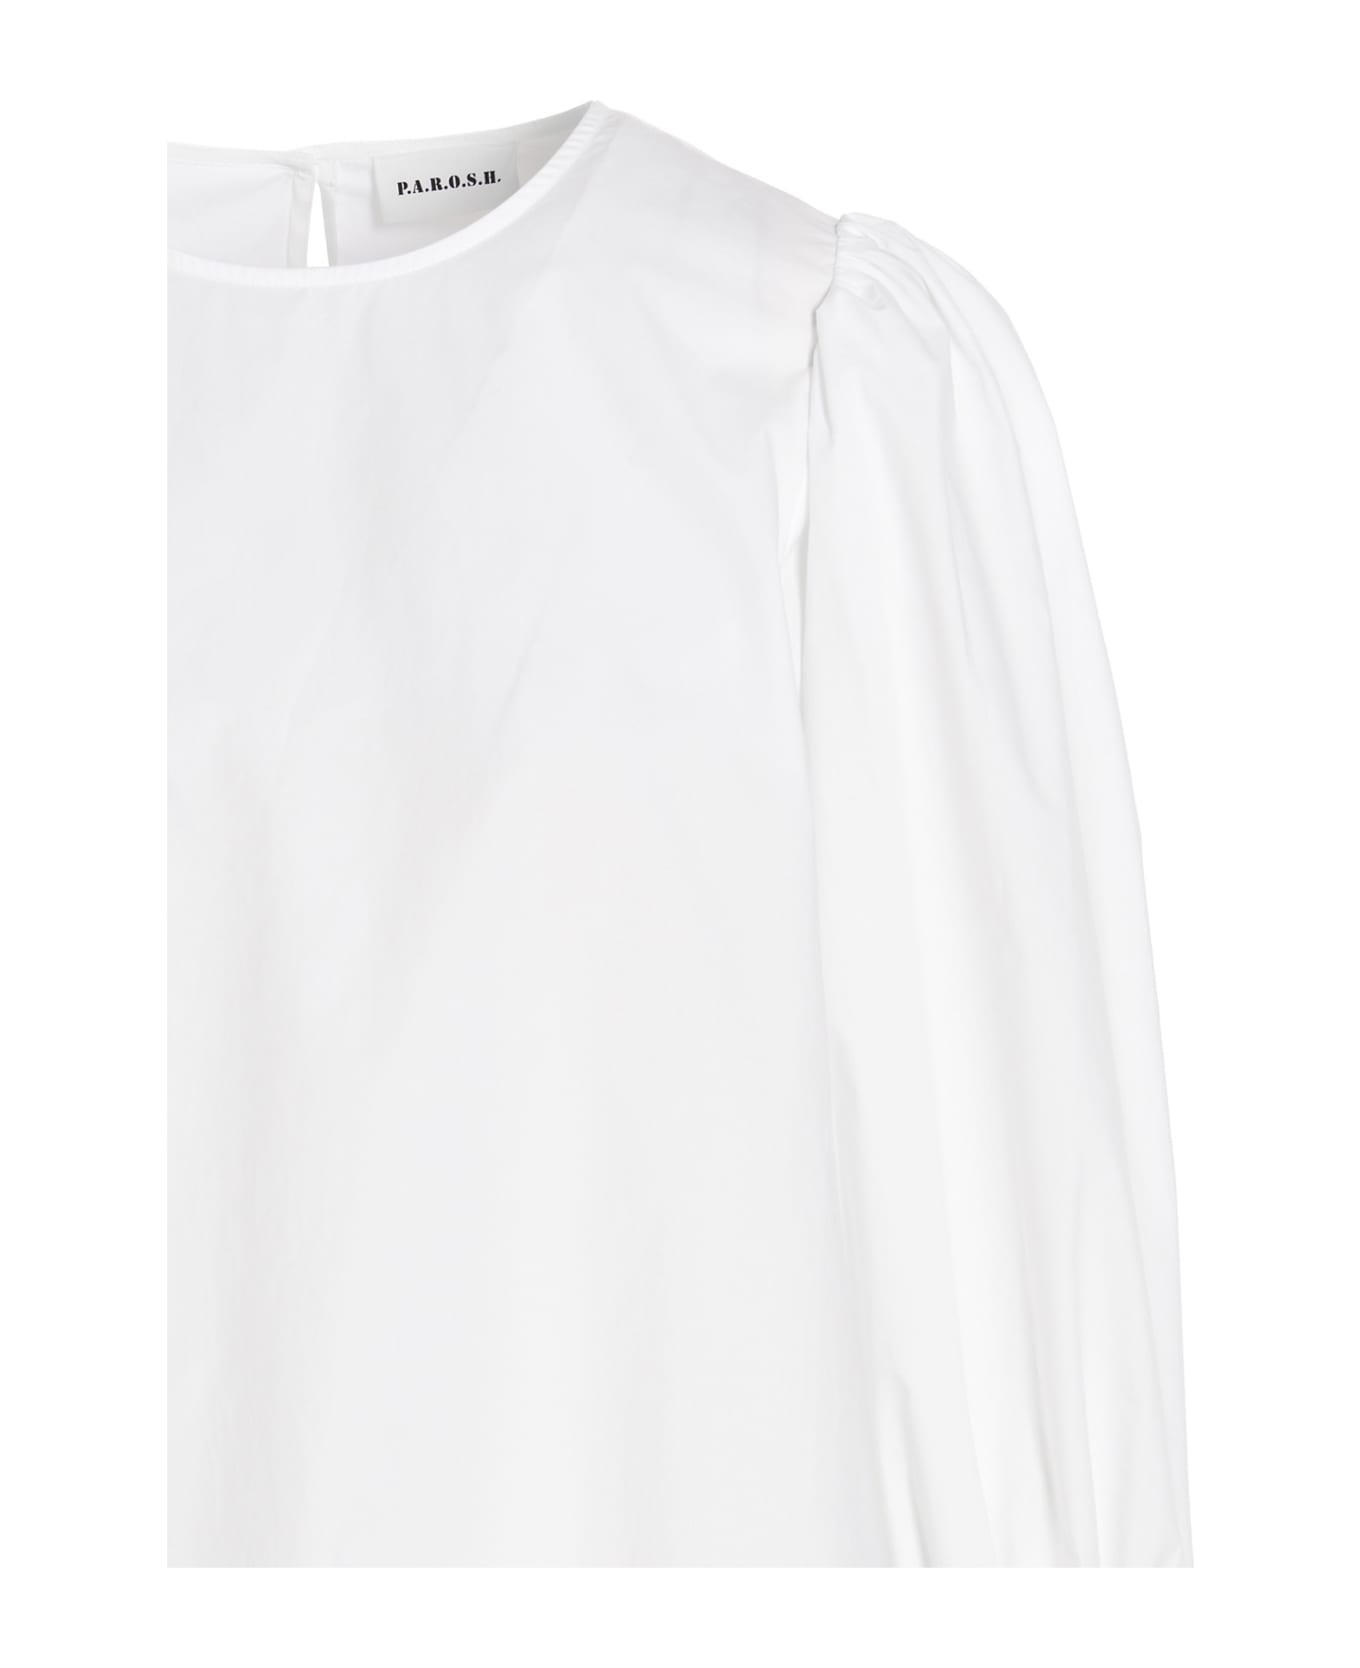 P.A.R.O.S.H Womens Tops P.A.R.O.S.H Tops Cotton Blouse in White 